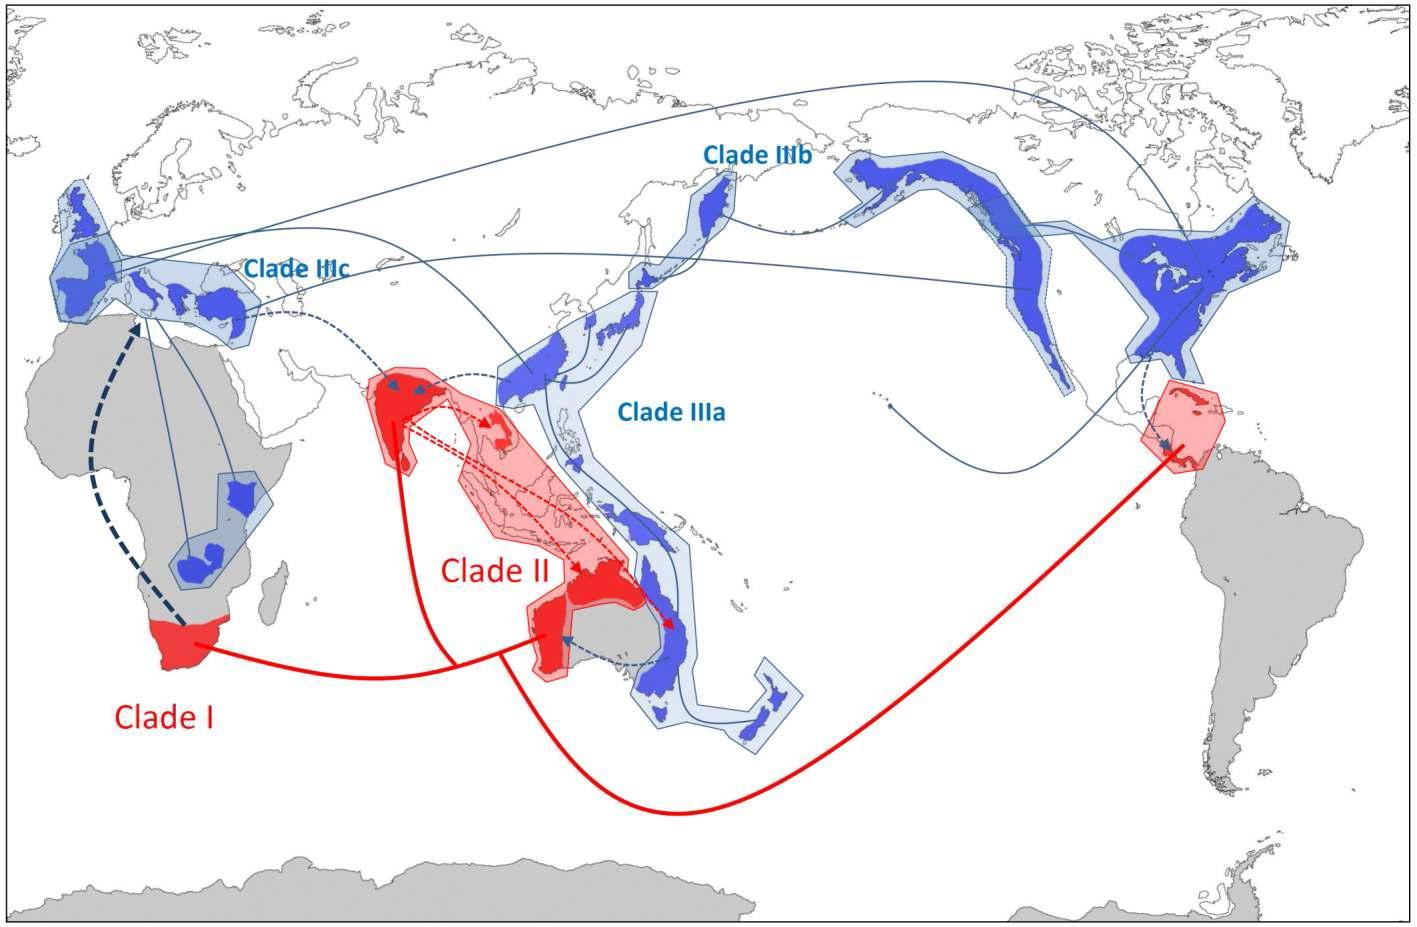 Hypothesis of distribution pattern of Isoëtes based on molecular phylogeny (Fig. 3). Grey regions represent continents splitted from the large continent Gondwana. Red color indicates clade and distribution area of which species diverged by vicariance. Blue color indicates clade and distribution area of which species diverged by dispersal. Solid line represent molecular phylogenetic relationships between species and/or clades. Inference of dispersal to other continent is represented dotted line with arrow head. This map of hypotheses was constructed based on unpublished data and previous studies (Hoot et al. 2006; Kim et al. 2009b, 2010b)